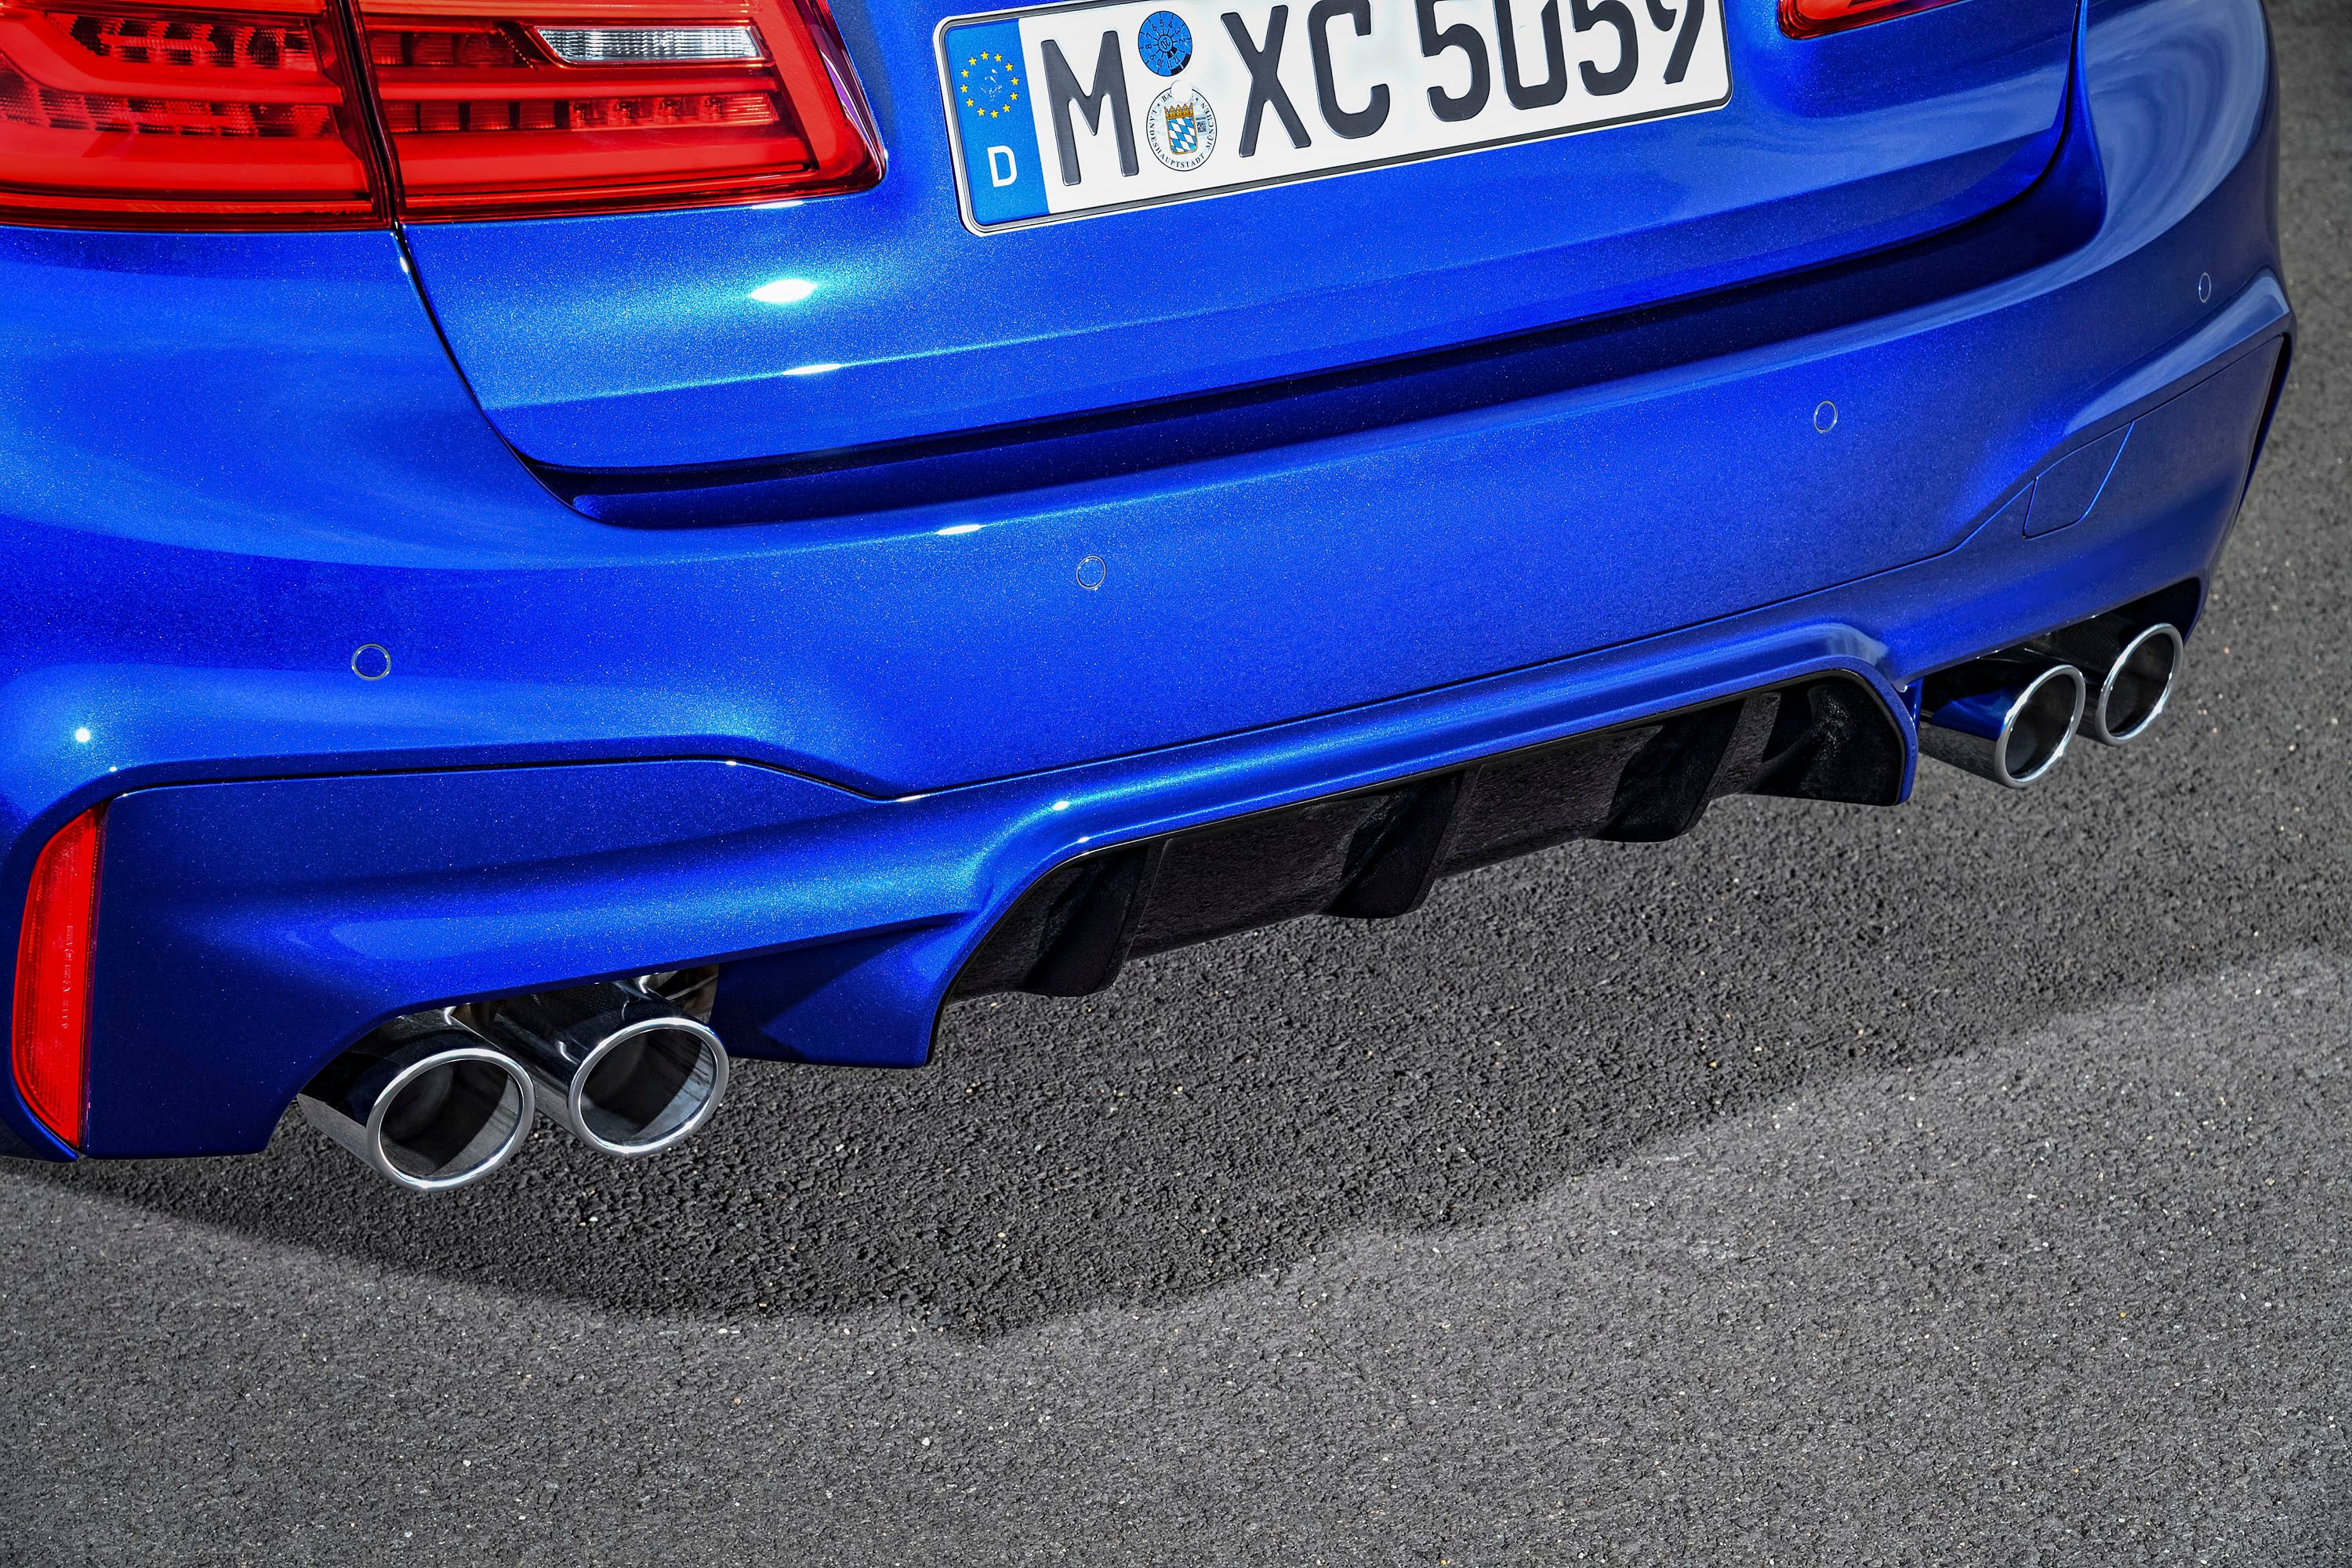 Quad exhaust and rear diffuser as expected